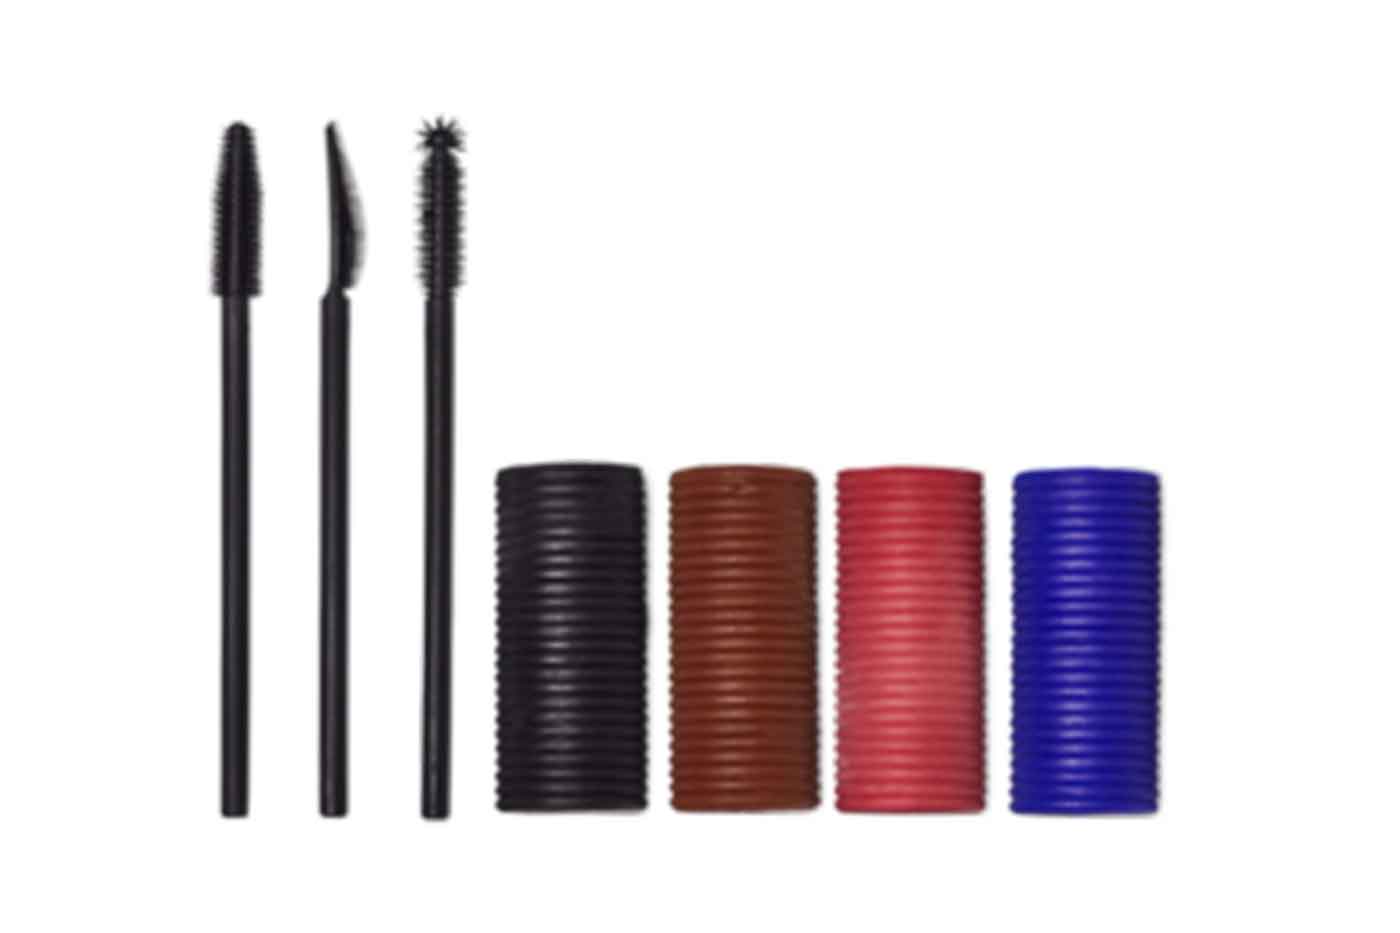 Lush launches Naked Mascara sans packaging material